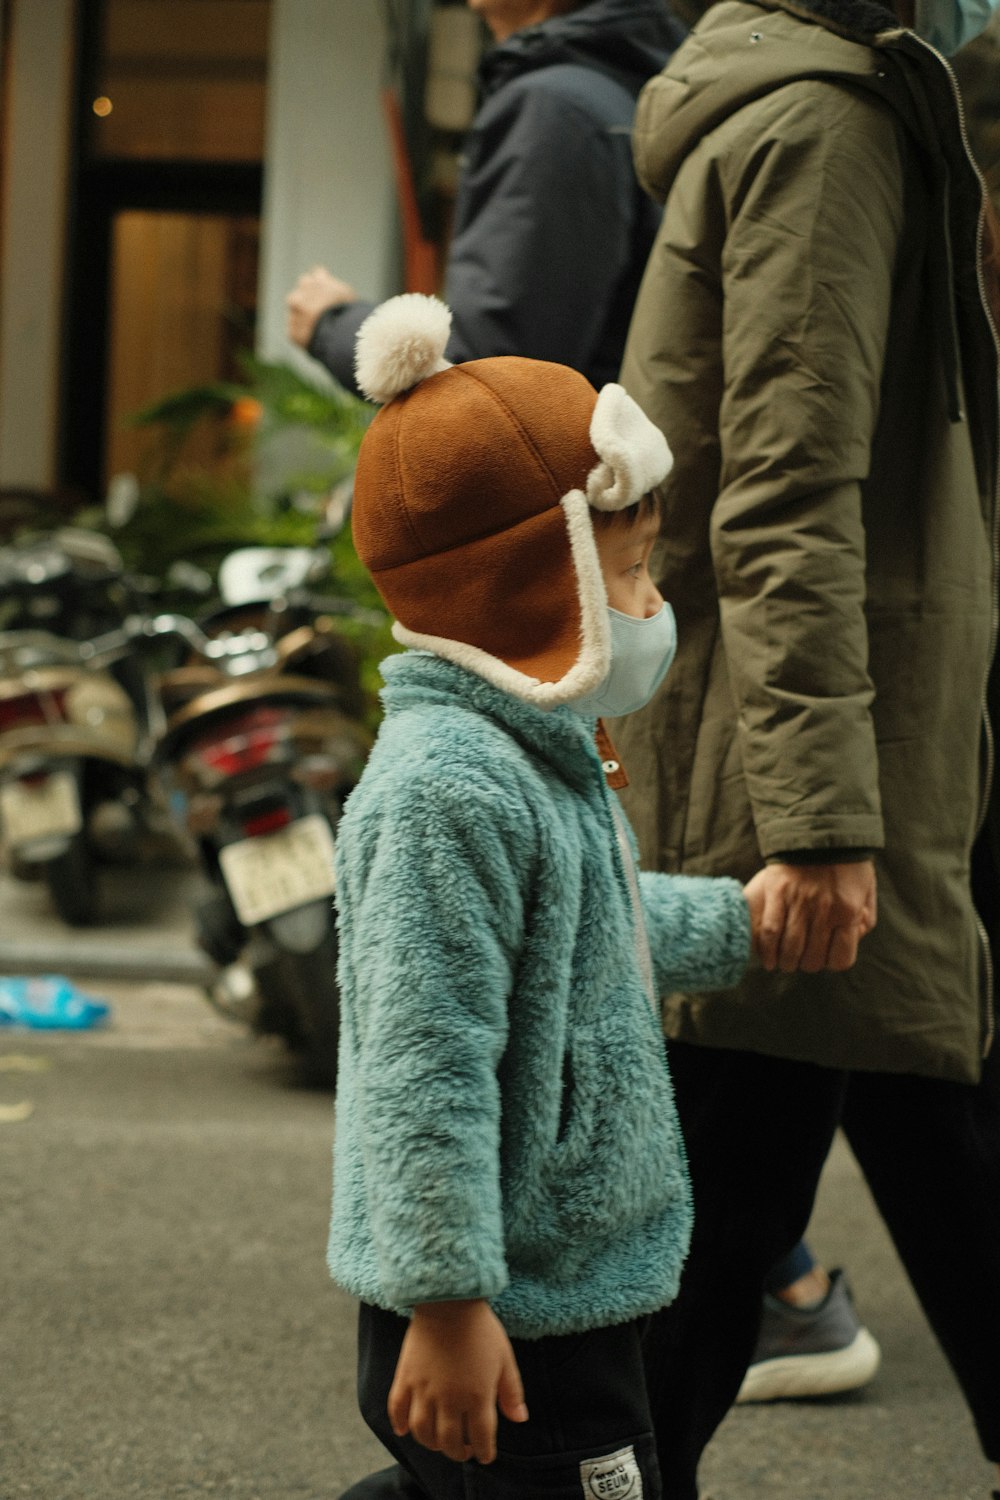 a small child wearing a face mask walking down a street